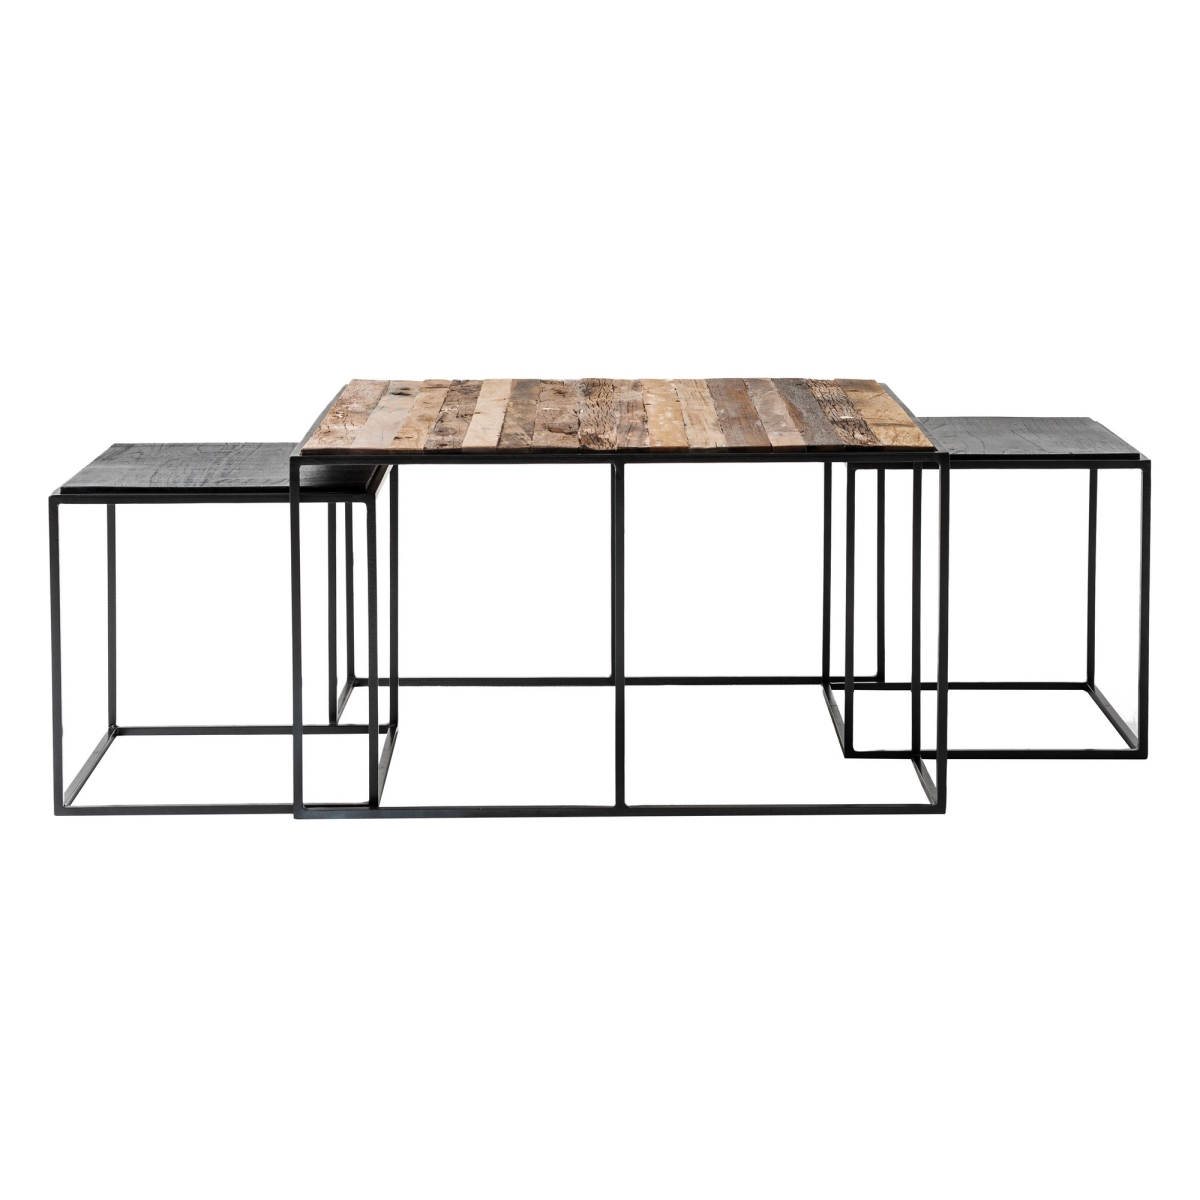 UPC 808230000070 product image for 397386 Black & Rustic Natural Nesting Tables - Set of 3 | upcitemdb.com